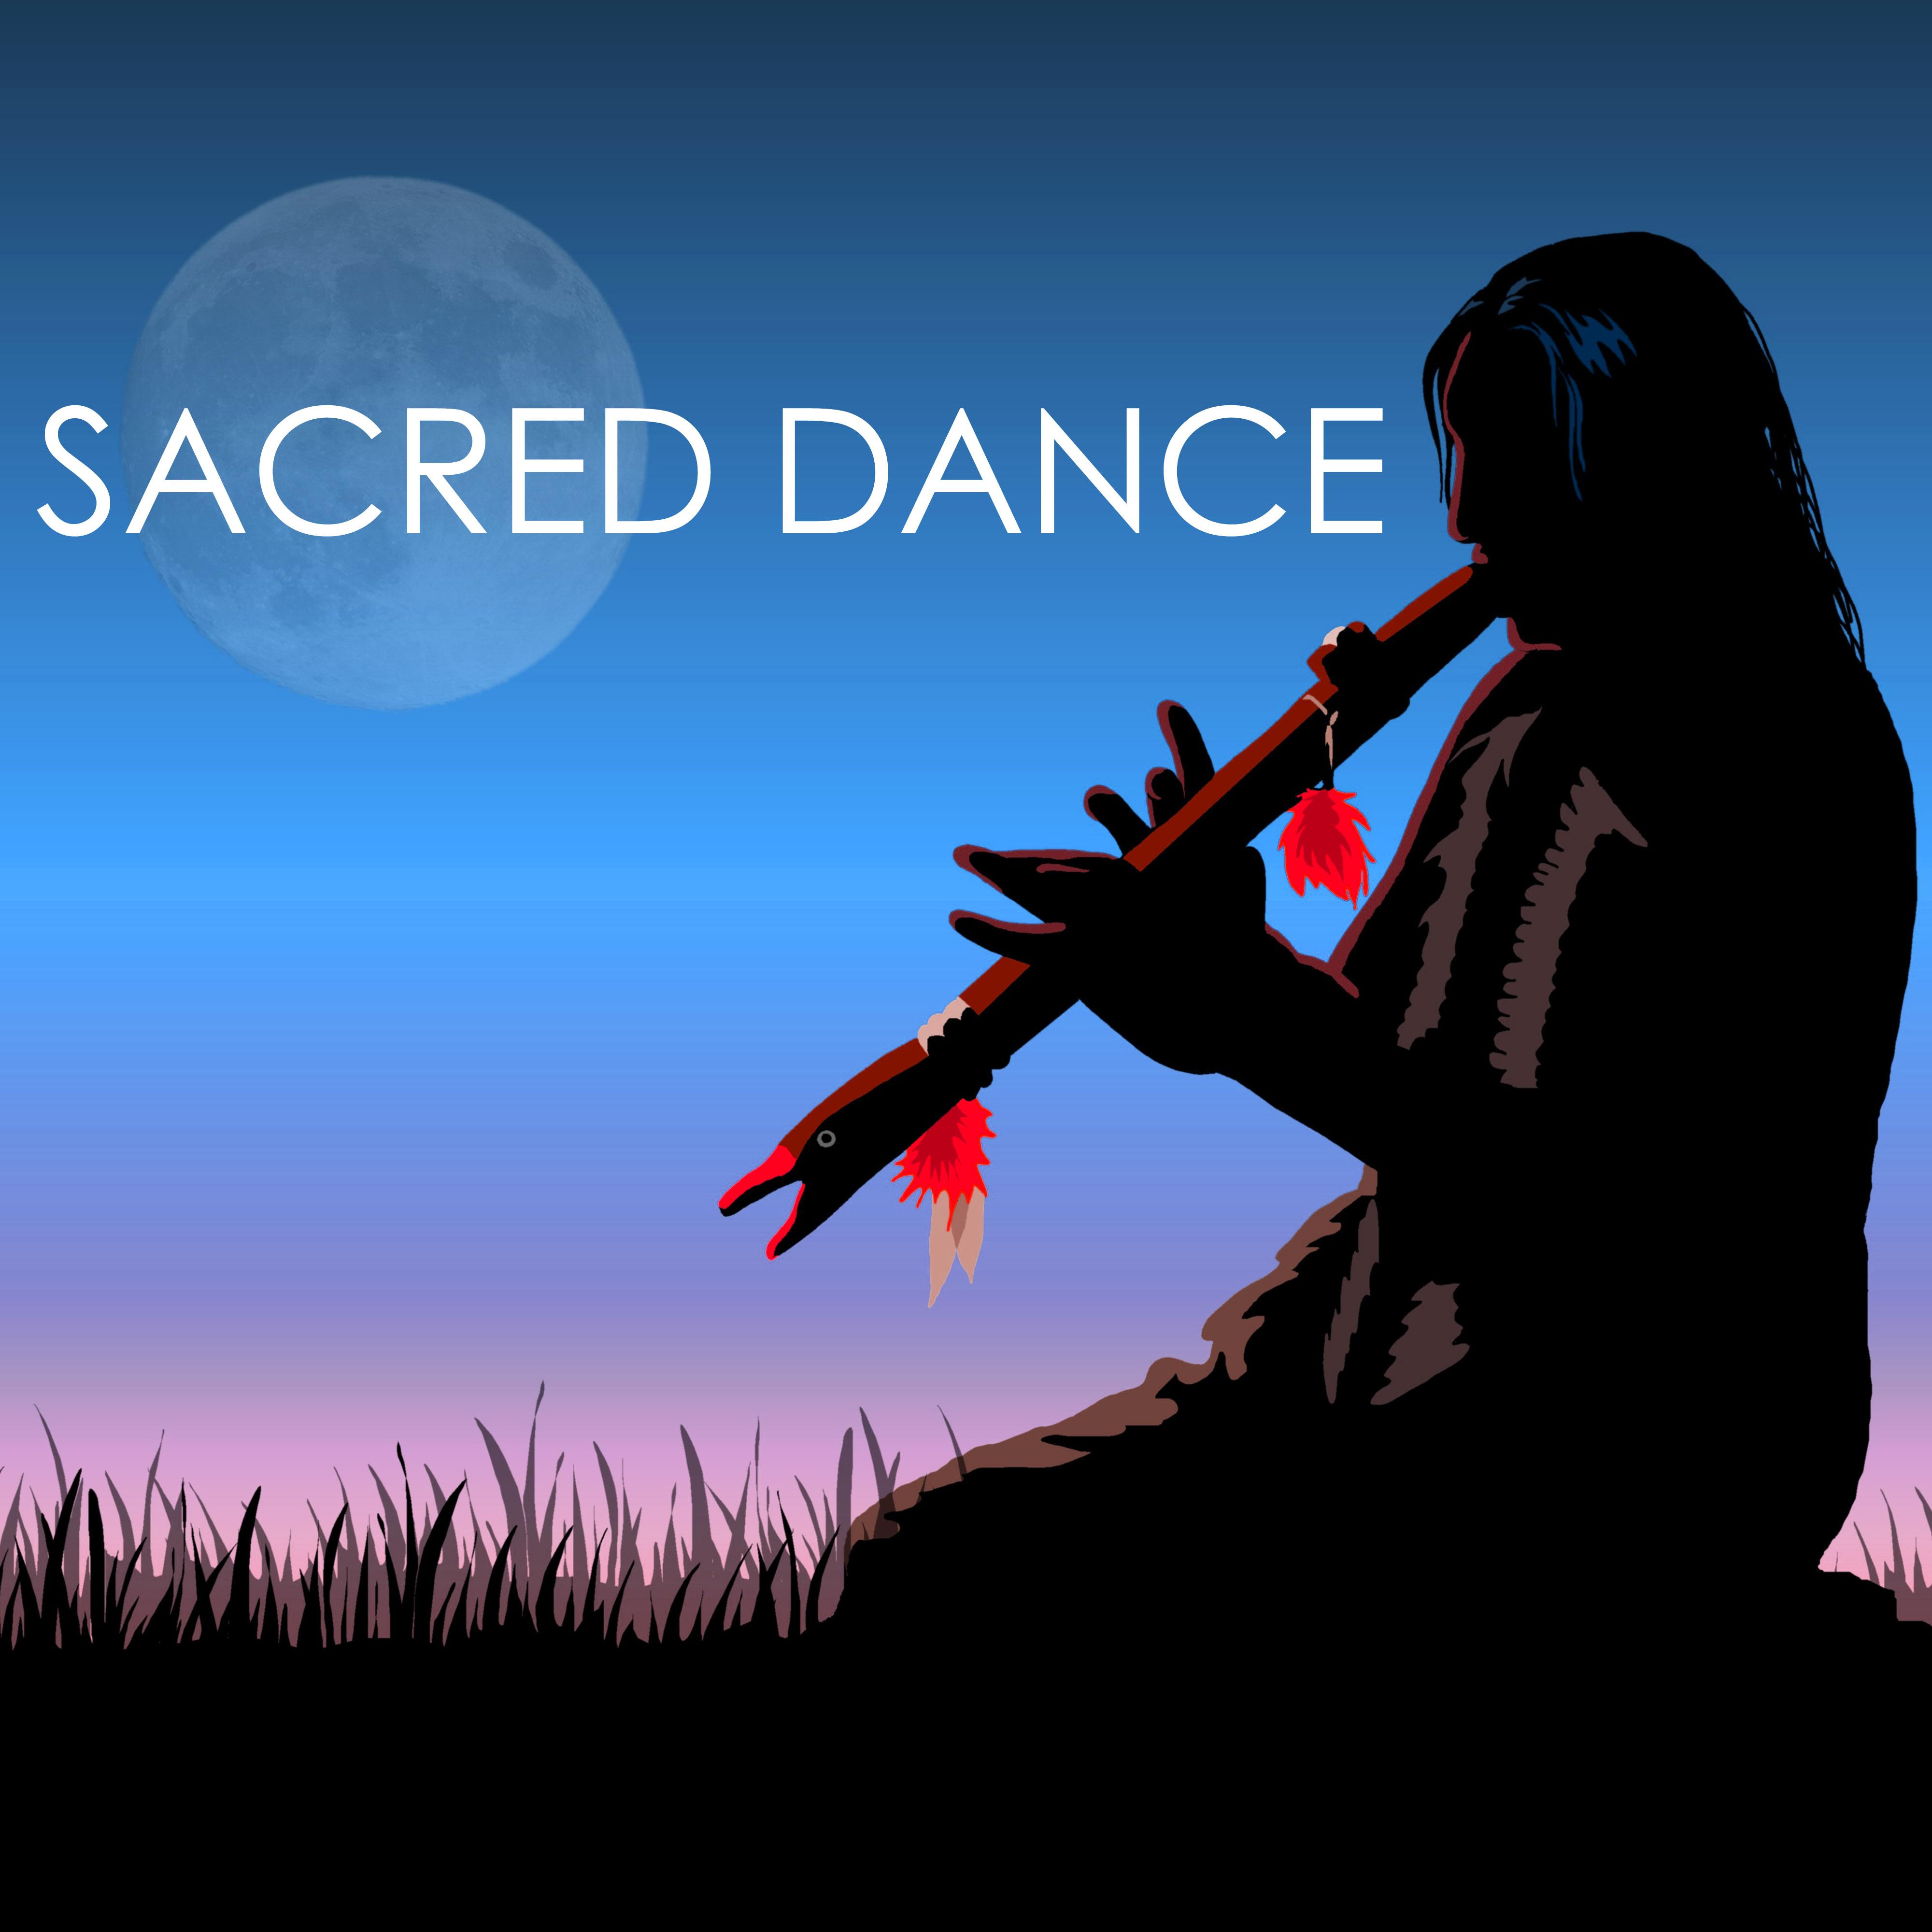 Sacred Dance - Native American Flute and Drums Music for Tribal Shamanic Drumming Meditations